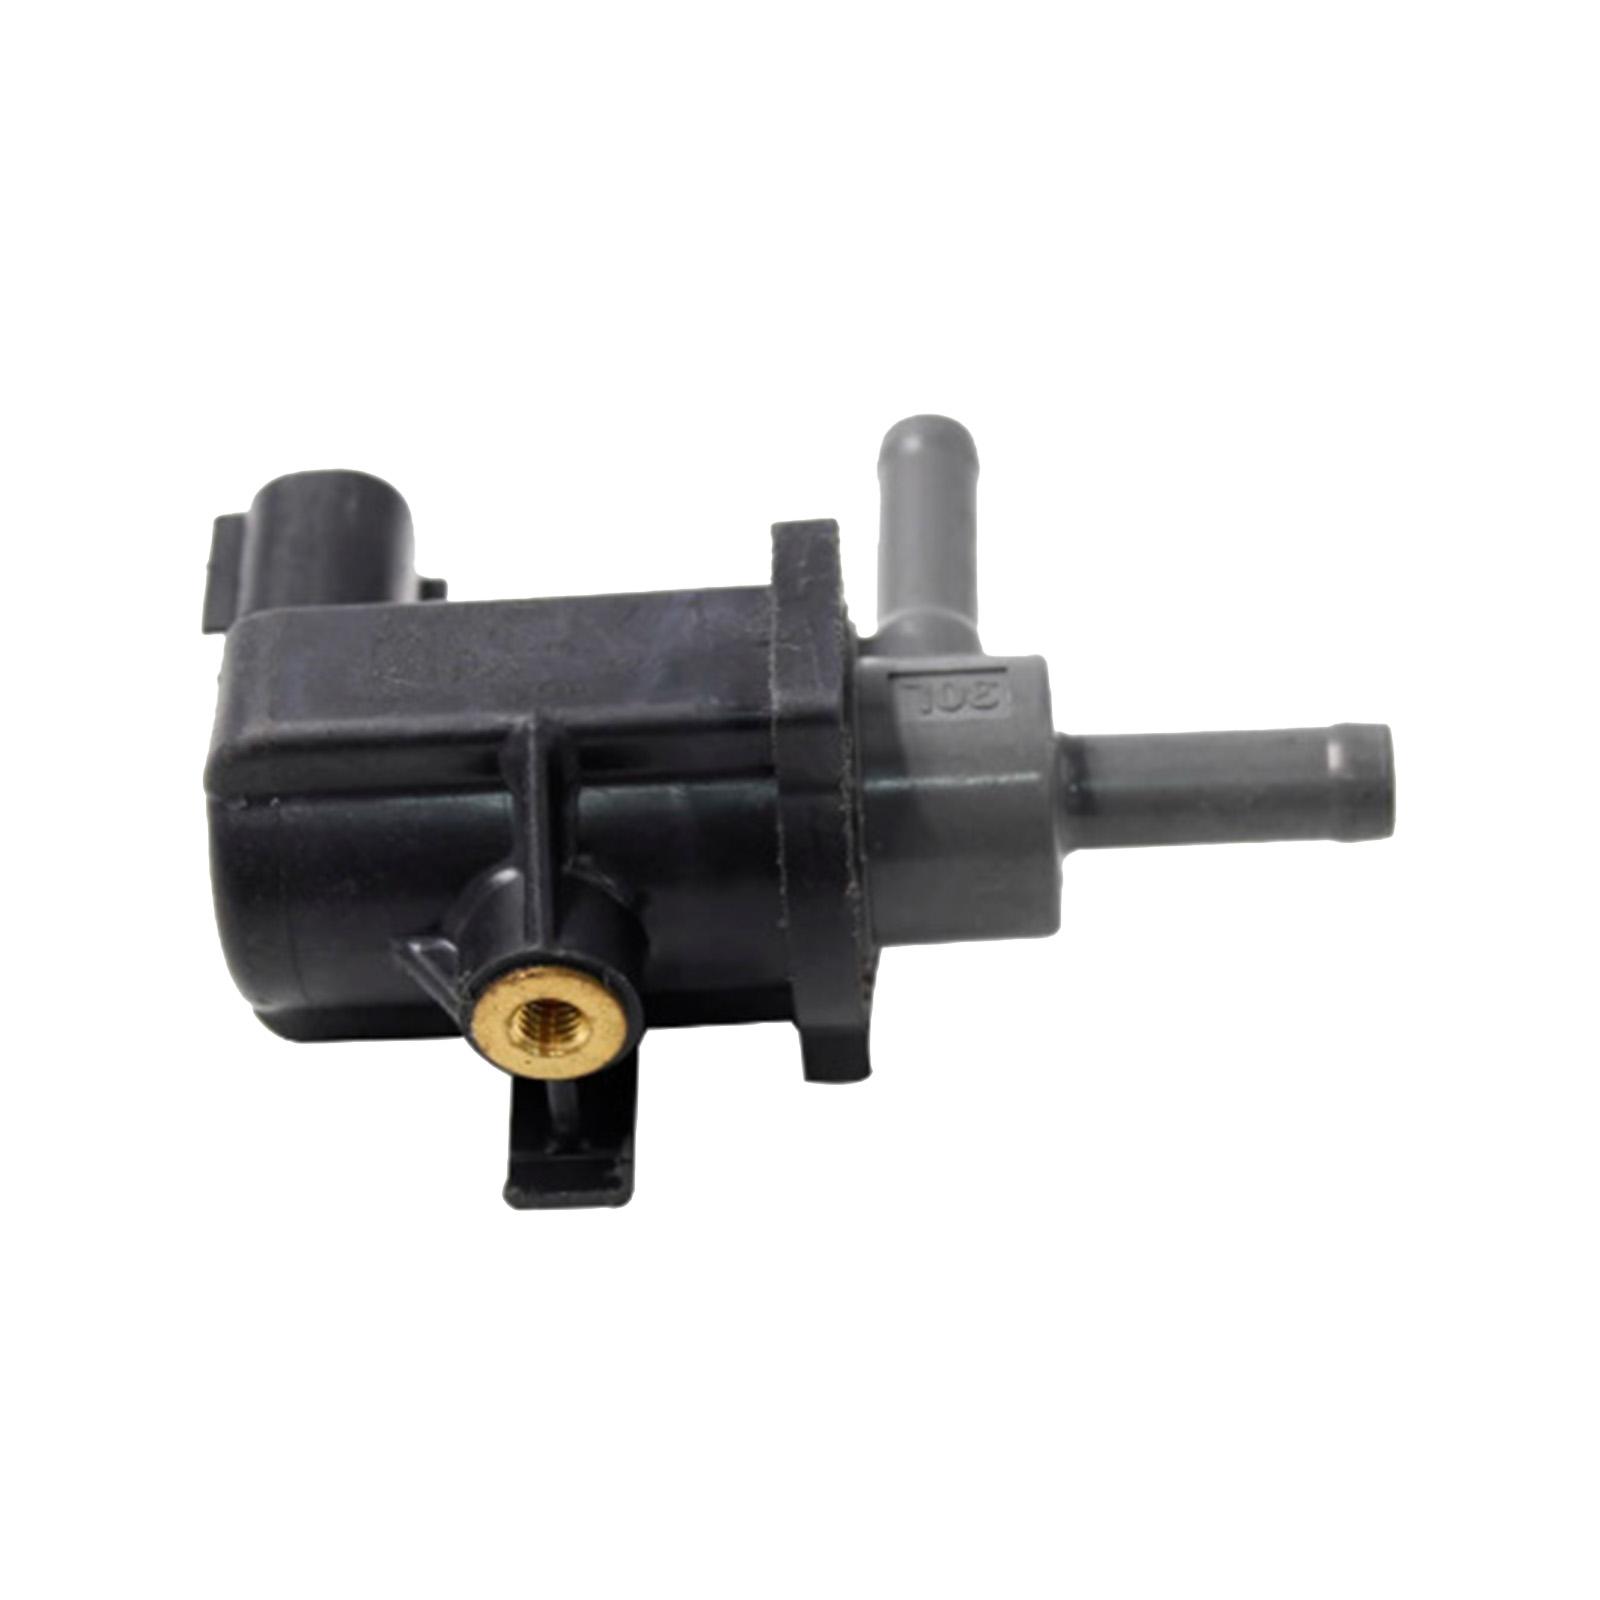 Solenoid 90910-12273 136200-2740 2004-2008 , Professional Compnts - image 1 of 4